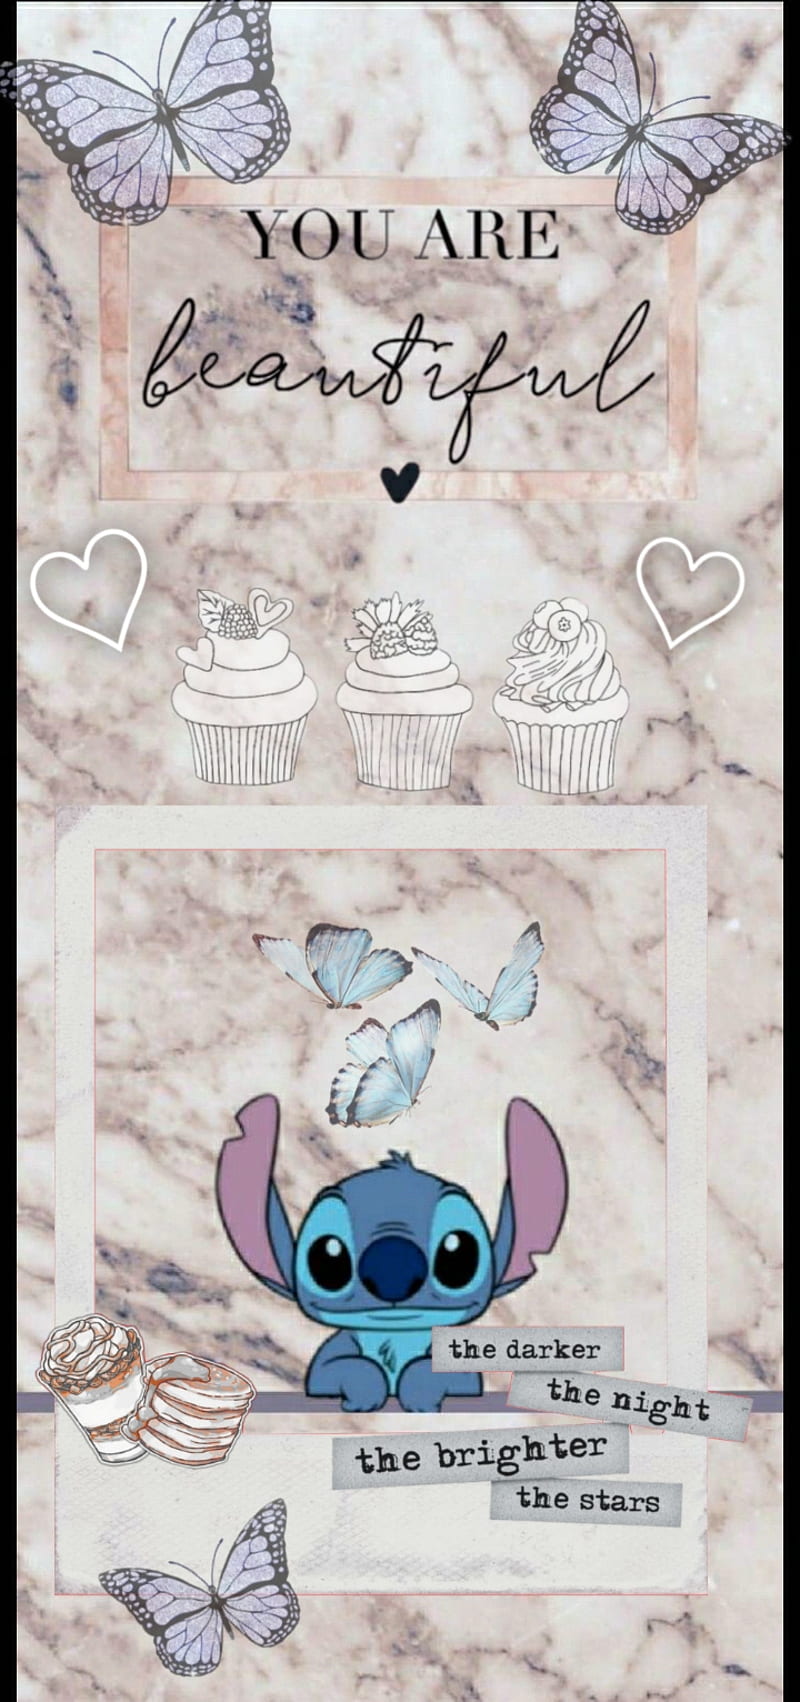 200+] Cute Stitch Wallpapers | Wallpapers.com